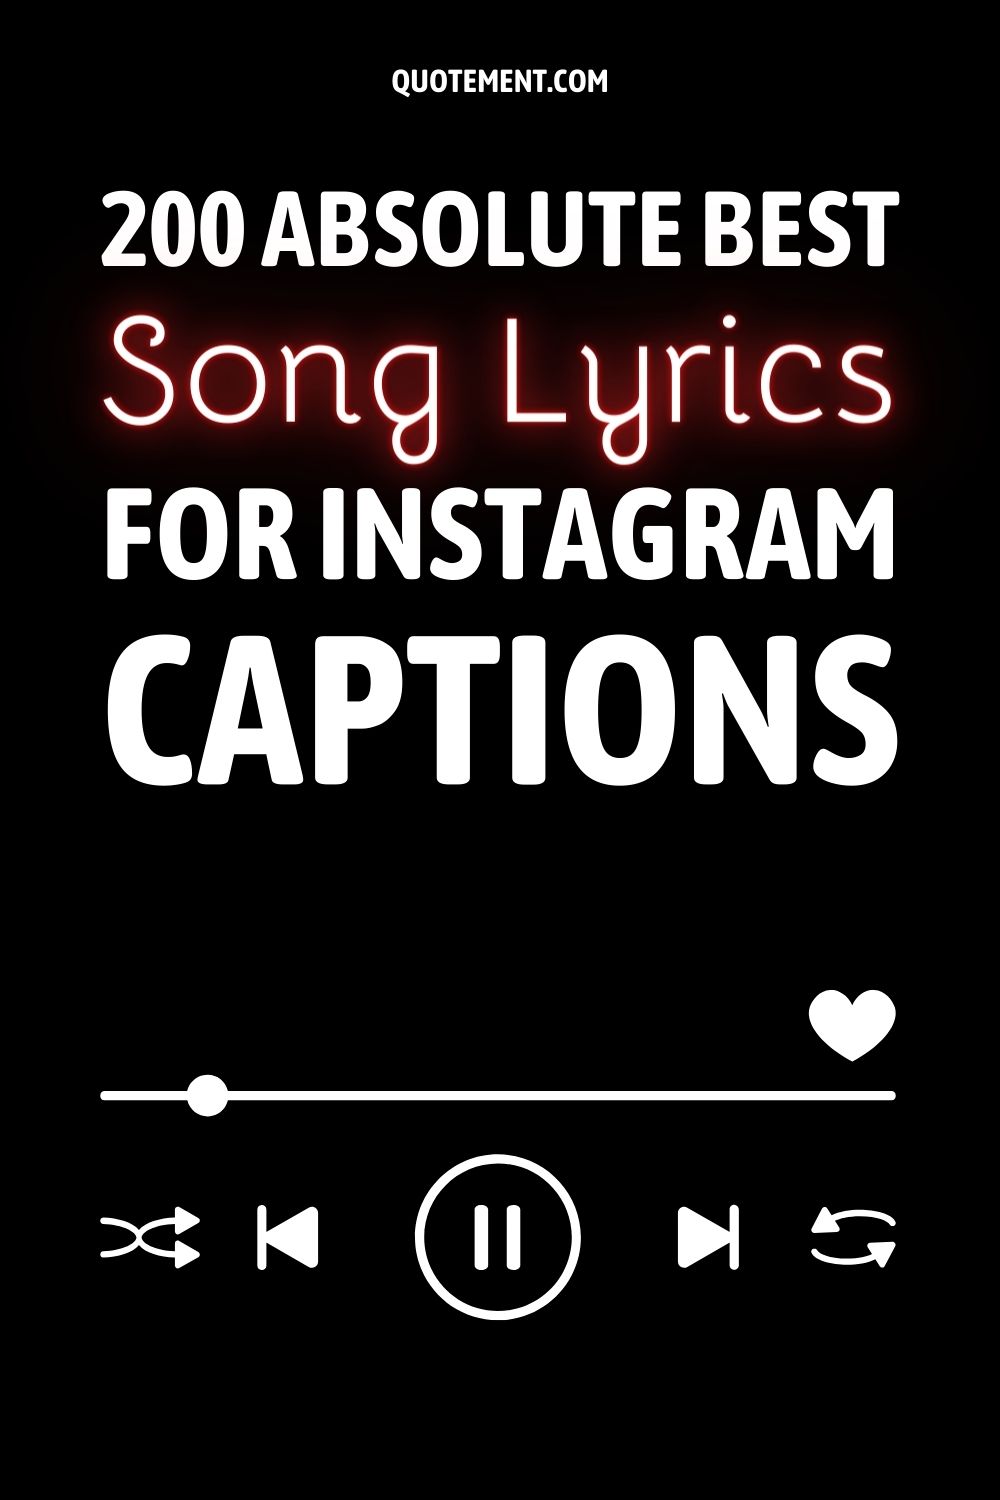 200 Absolute Best Song Lyrics For Instagram Captions
